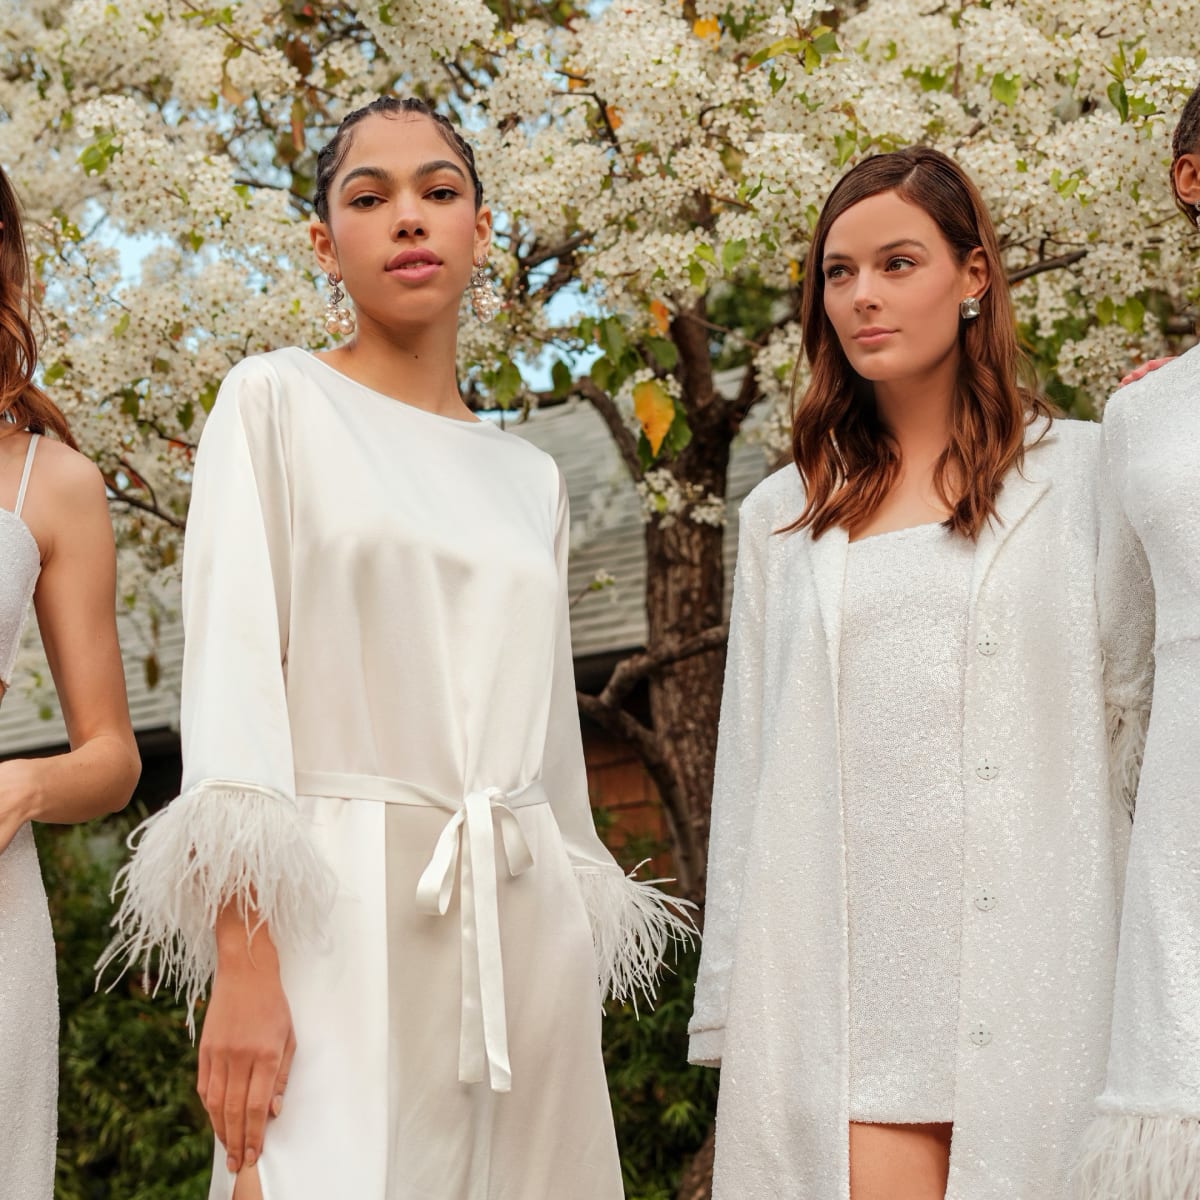 9 Sporty Wedding Dresses for the Athleisure-Obsessed Bride